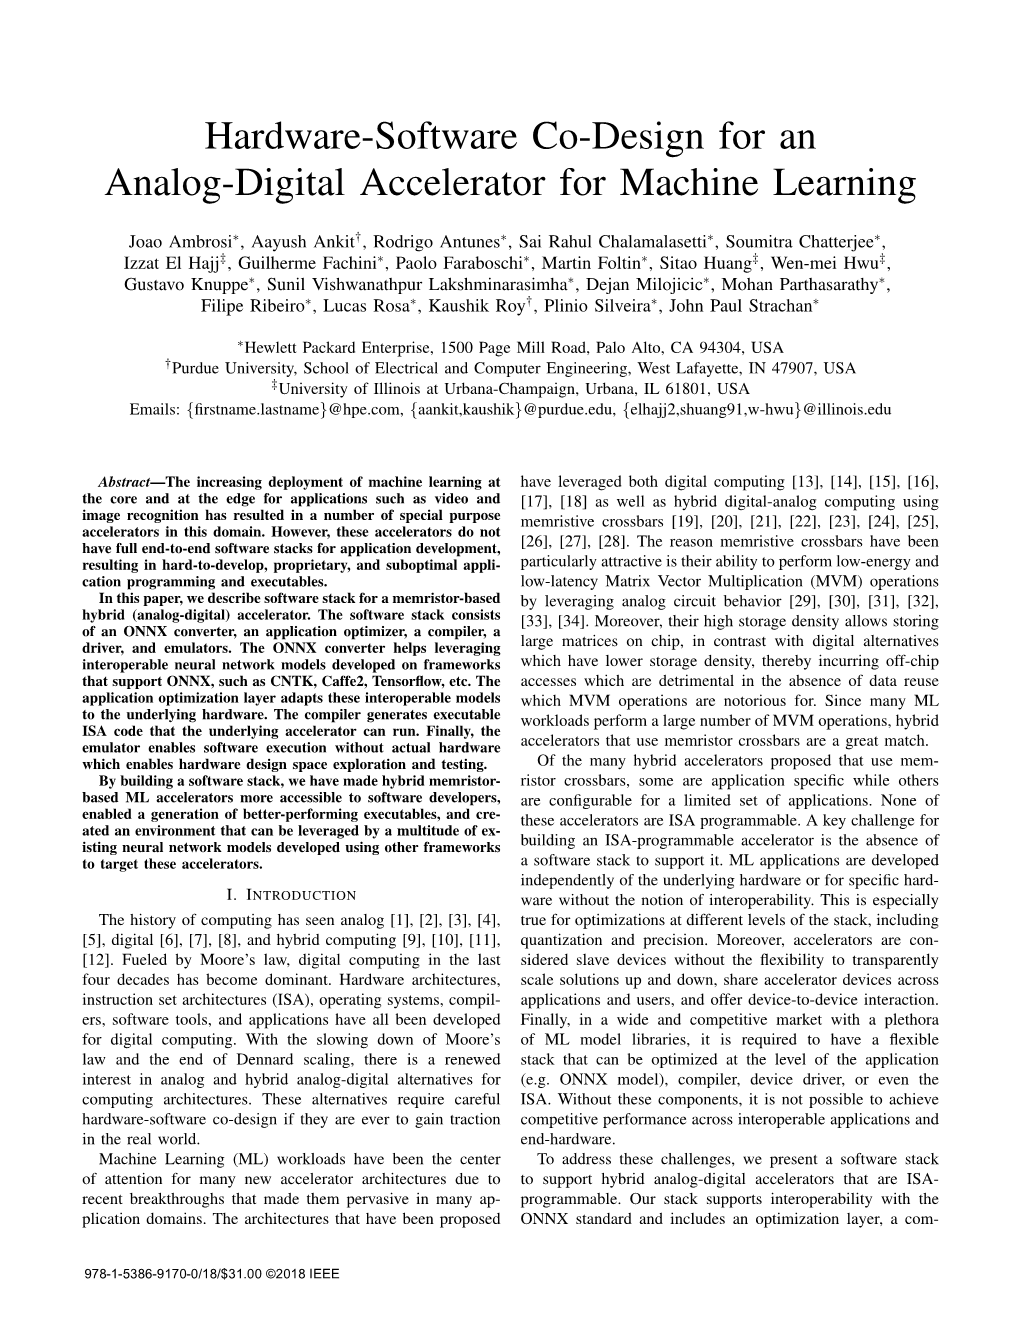 Hardware-Software Co-Design for an Analog-Digital Accelerator for Machine Learning